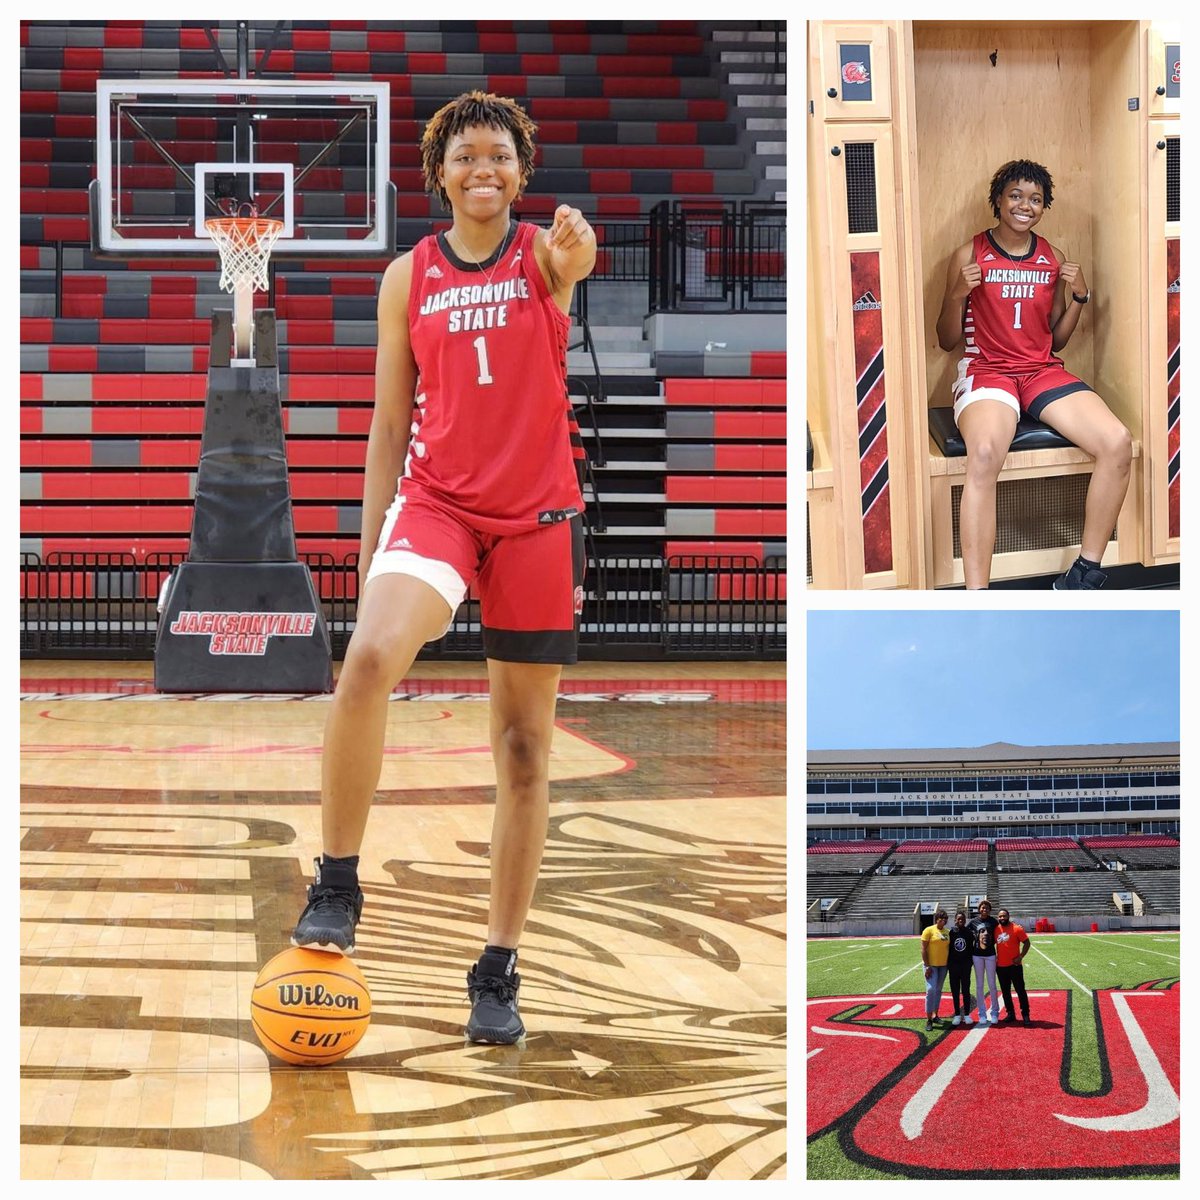 Thank you @CoachPietri , Coach Wise, and Coach Towns for the Awesome visit to Jacksonville State University! 
#Determination🙏 🏀 ❤️ 🔥